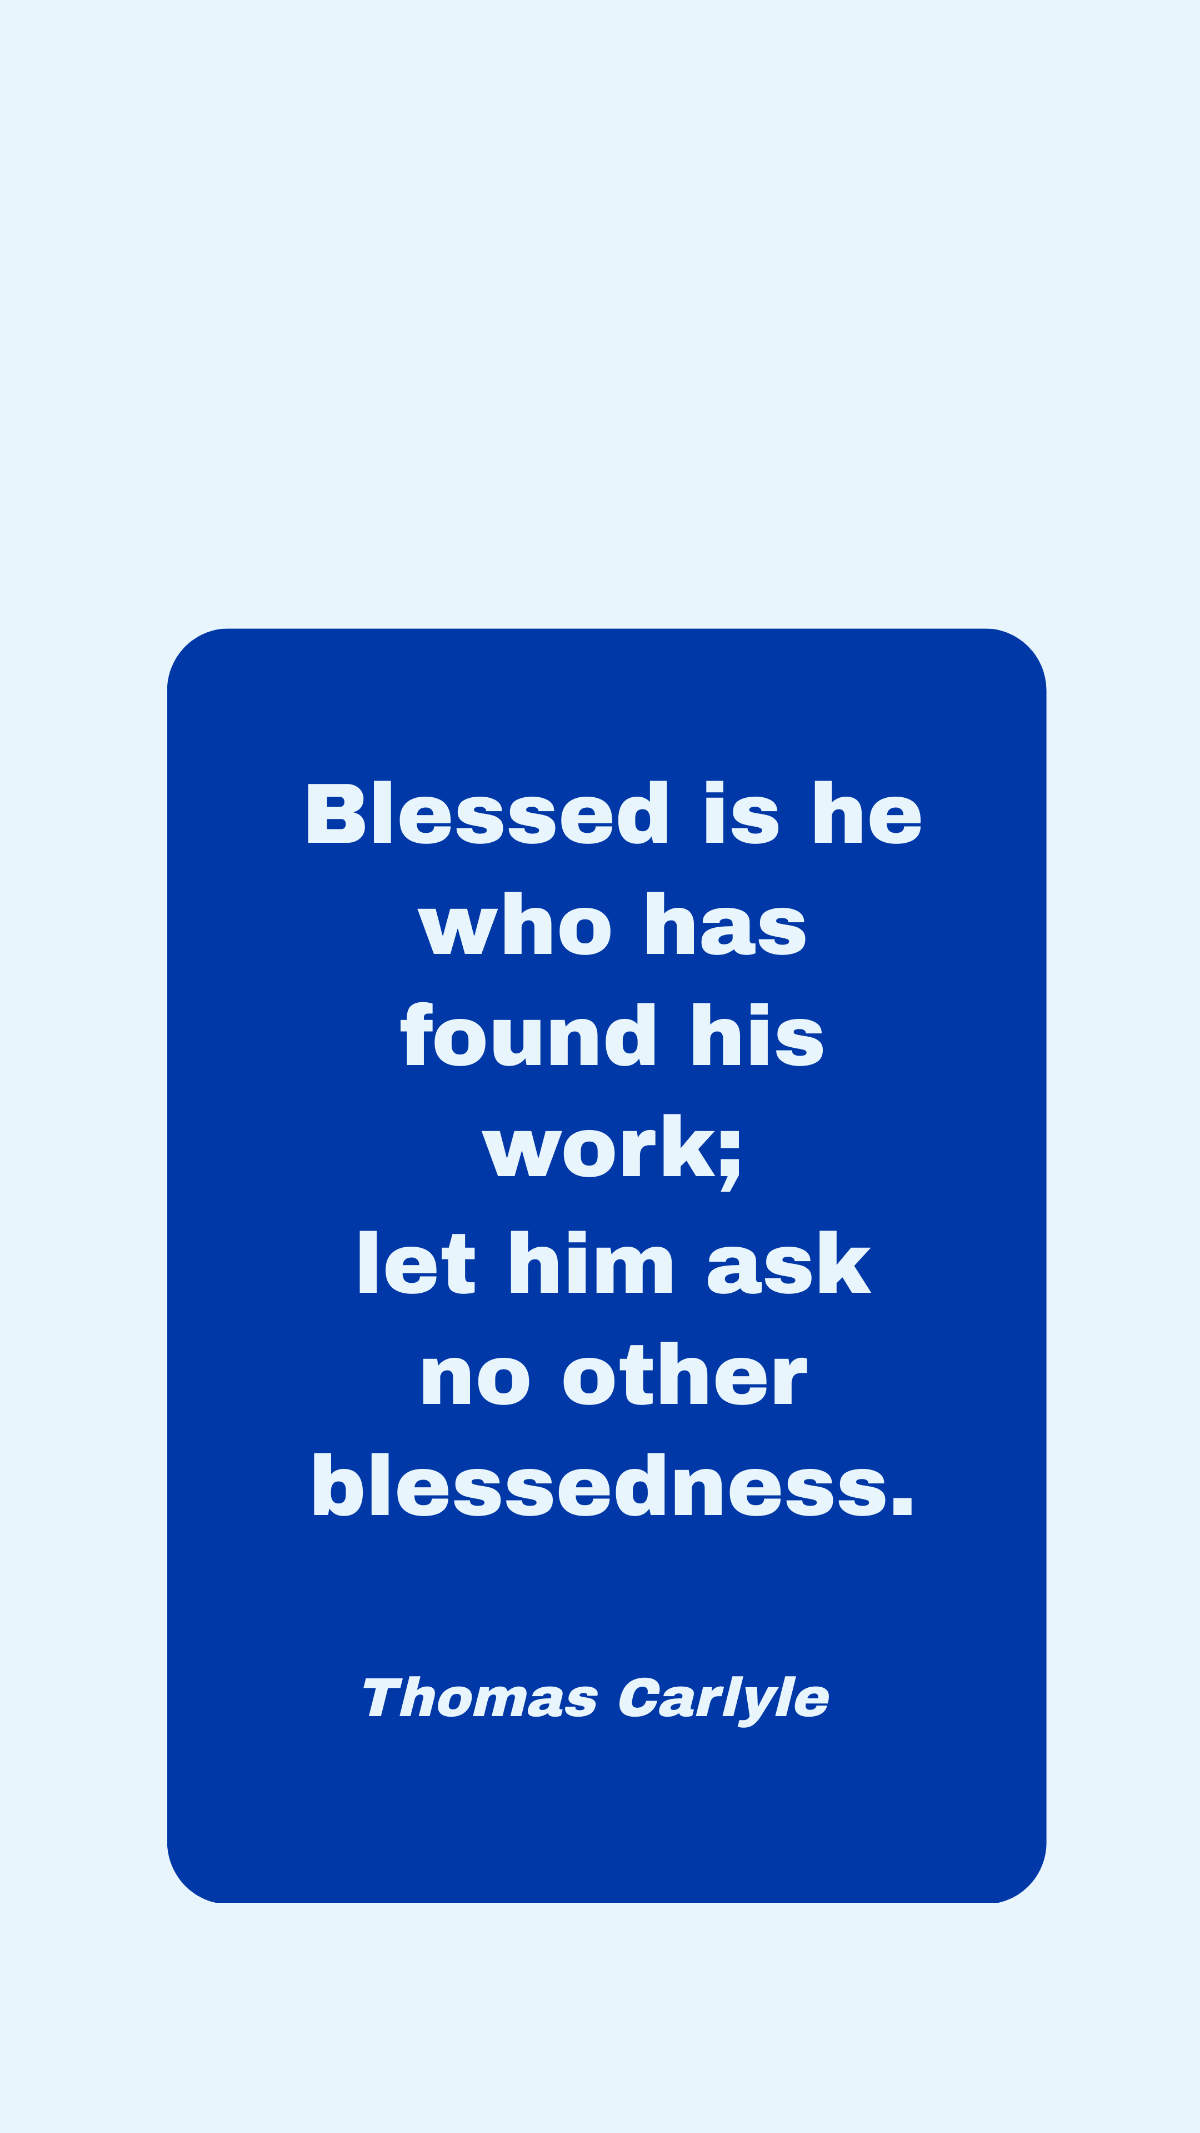 Thomas Carlyle - Blessed is he who has found his work; let him ask no other blessedness. Template